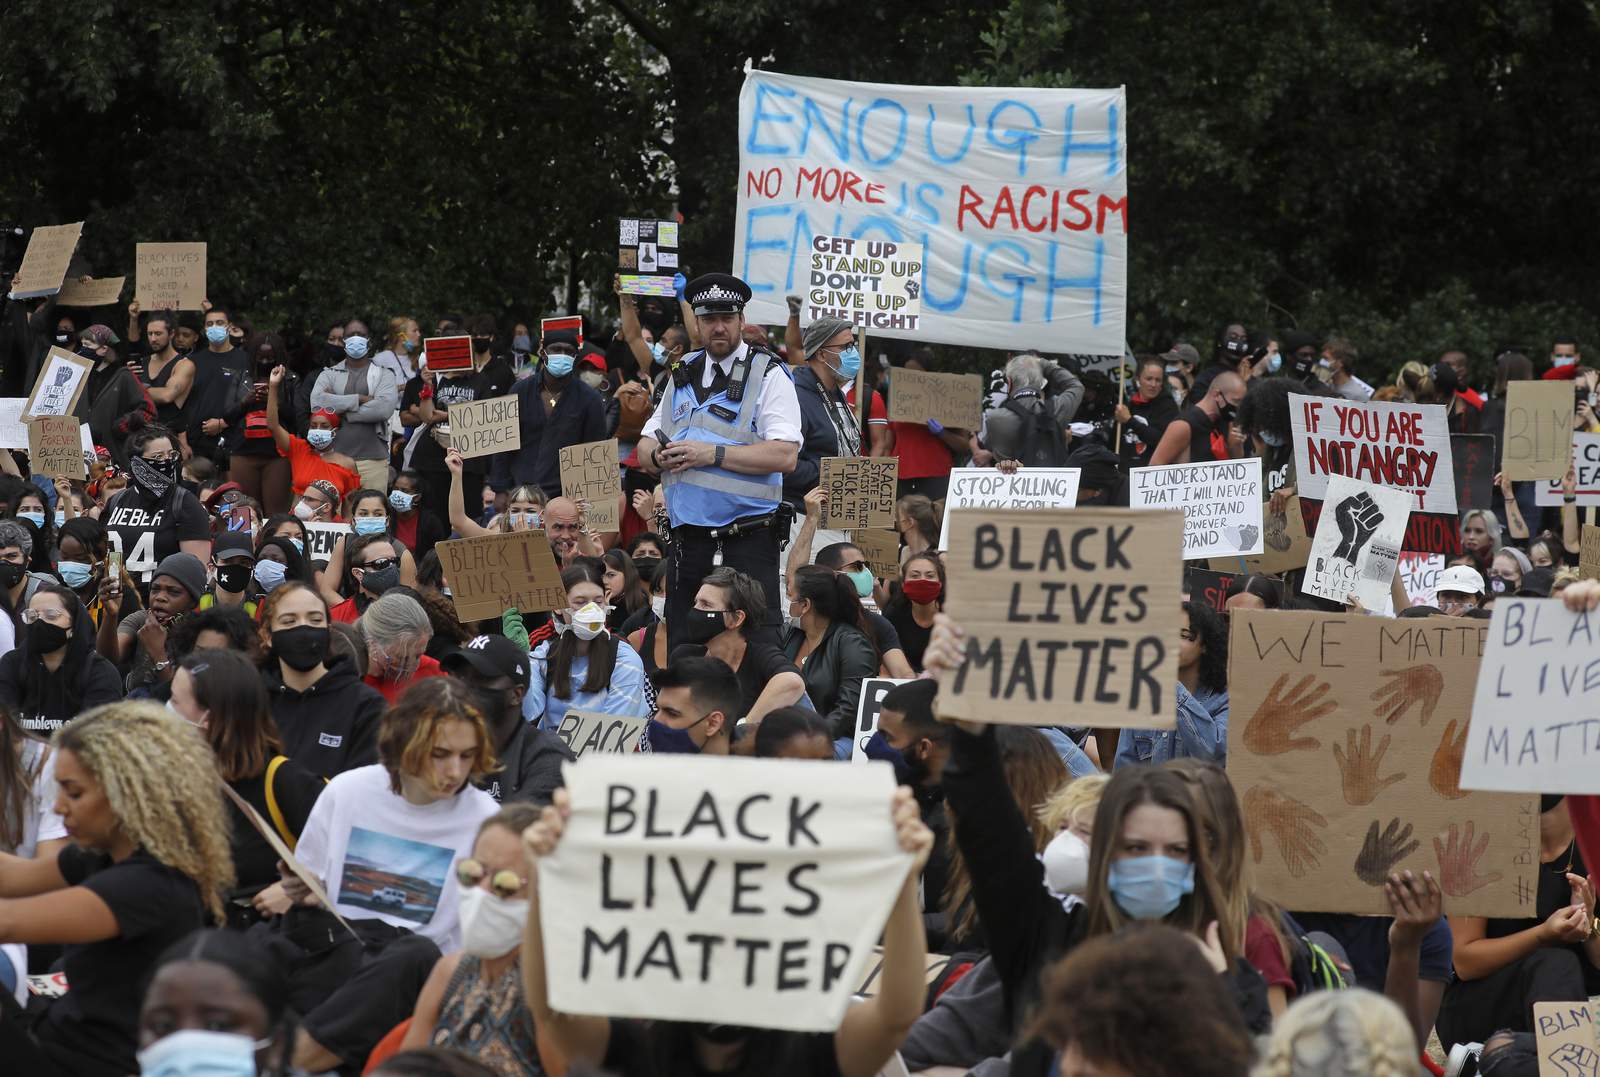 Thousands in Europe decry racial injustice, police violence